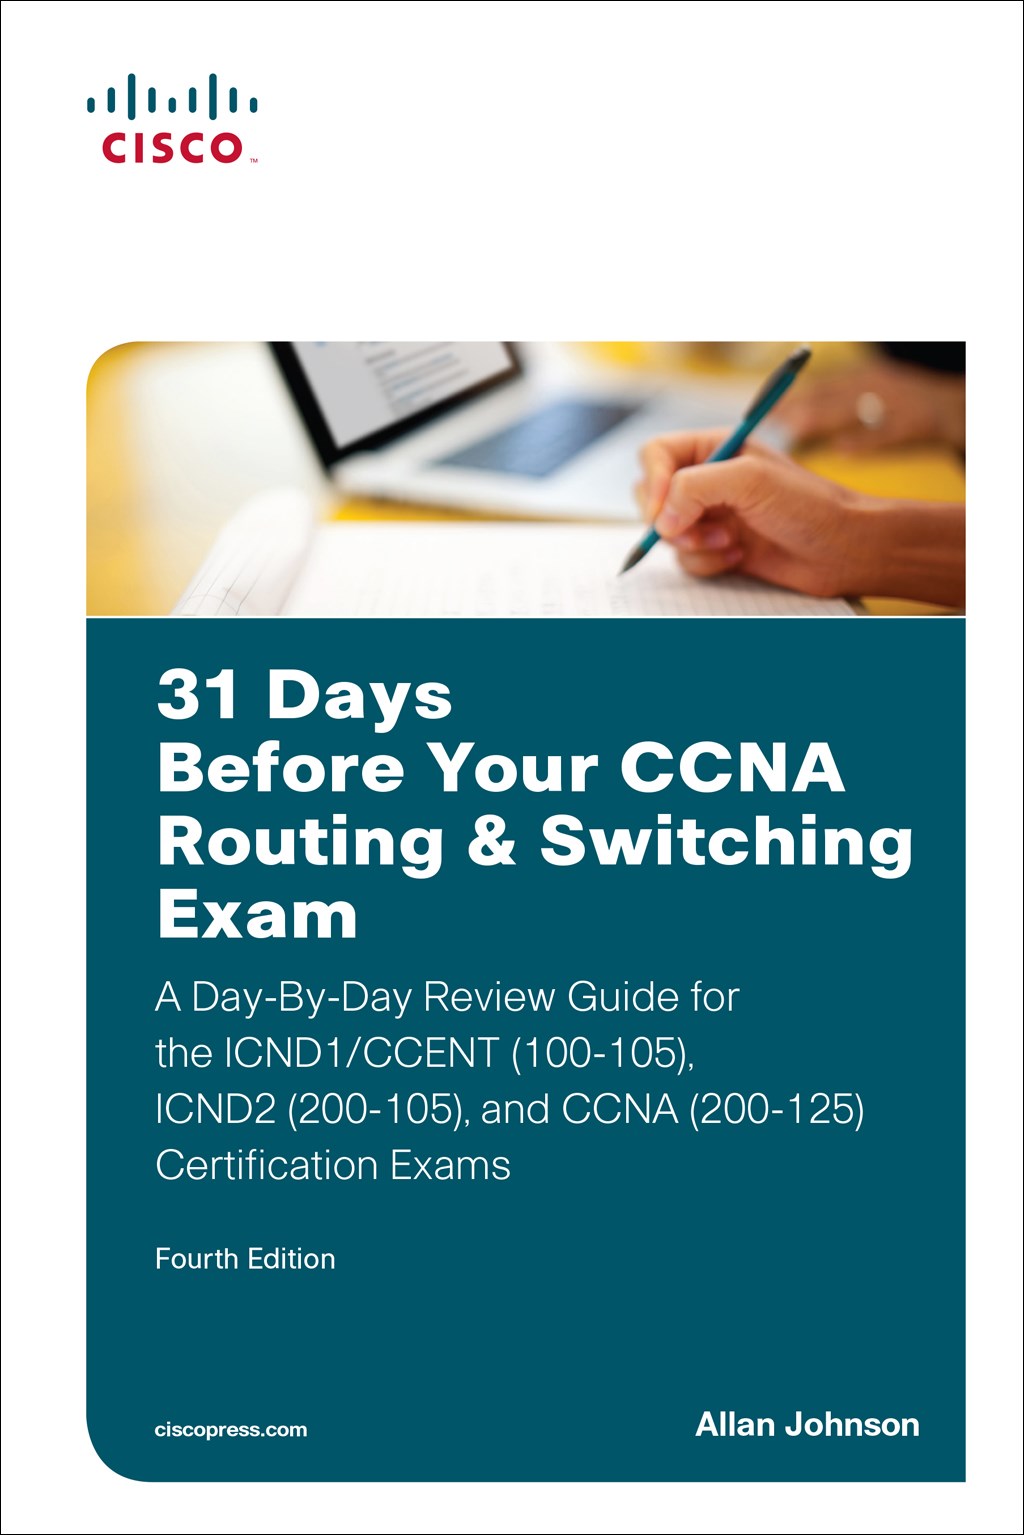 31 Days Before Your CCNA Routing & Switching Exam (Digital Study Guide): A Media-Rich, Web Edition of the Day-By-Day Review Guide for the ICND1 (100-105), ICND2 (200-105), and CCNA (200-125) Certification Exams, 2nd Edition